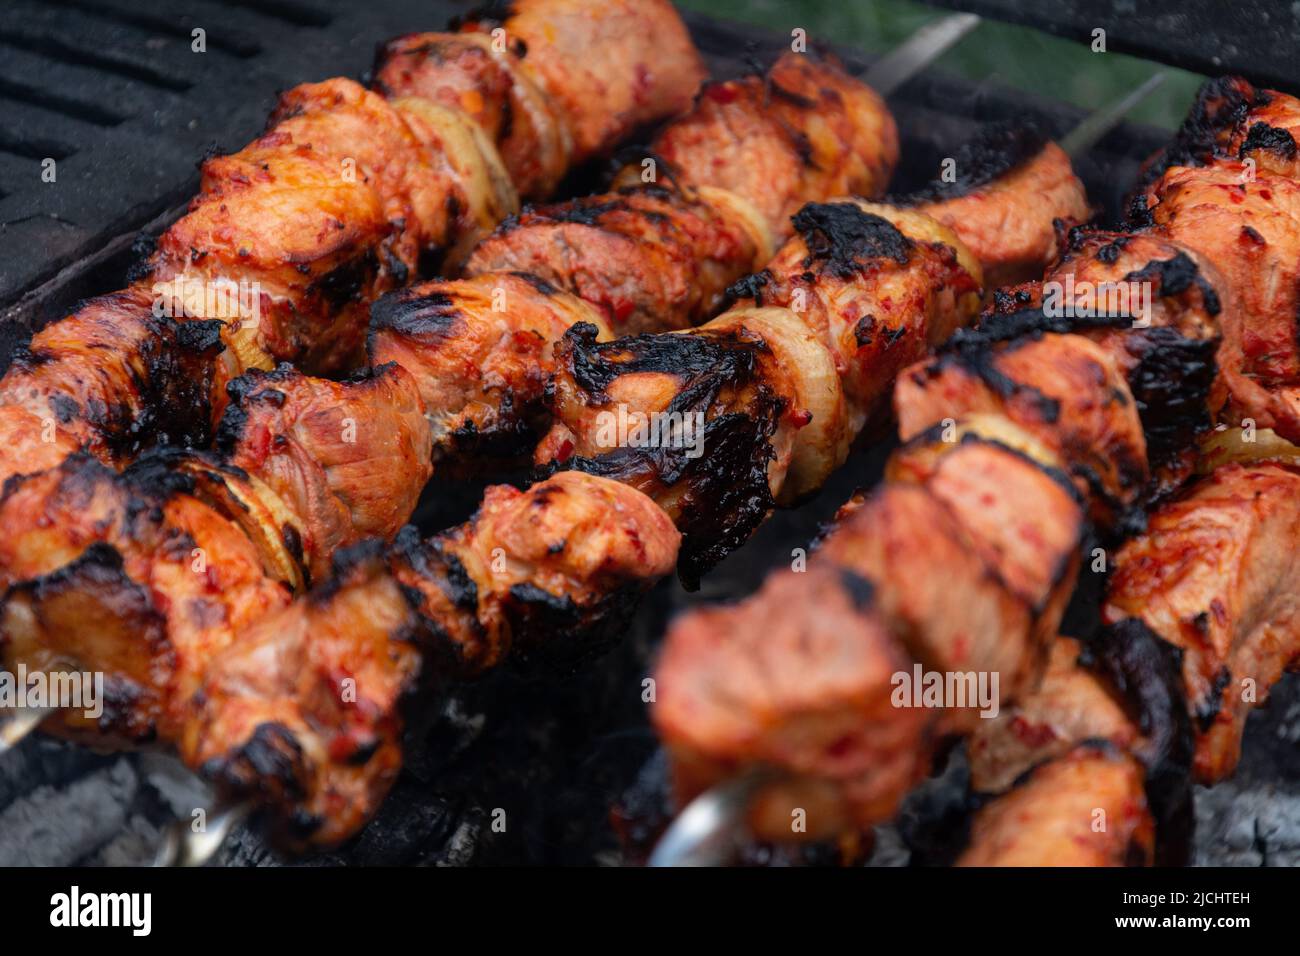 Kebab. Appetizing kebab marinated in red sauce with red pepper and onion is cooked on the grill Stock Photo